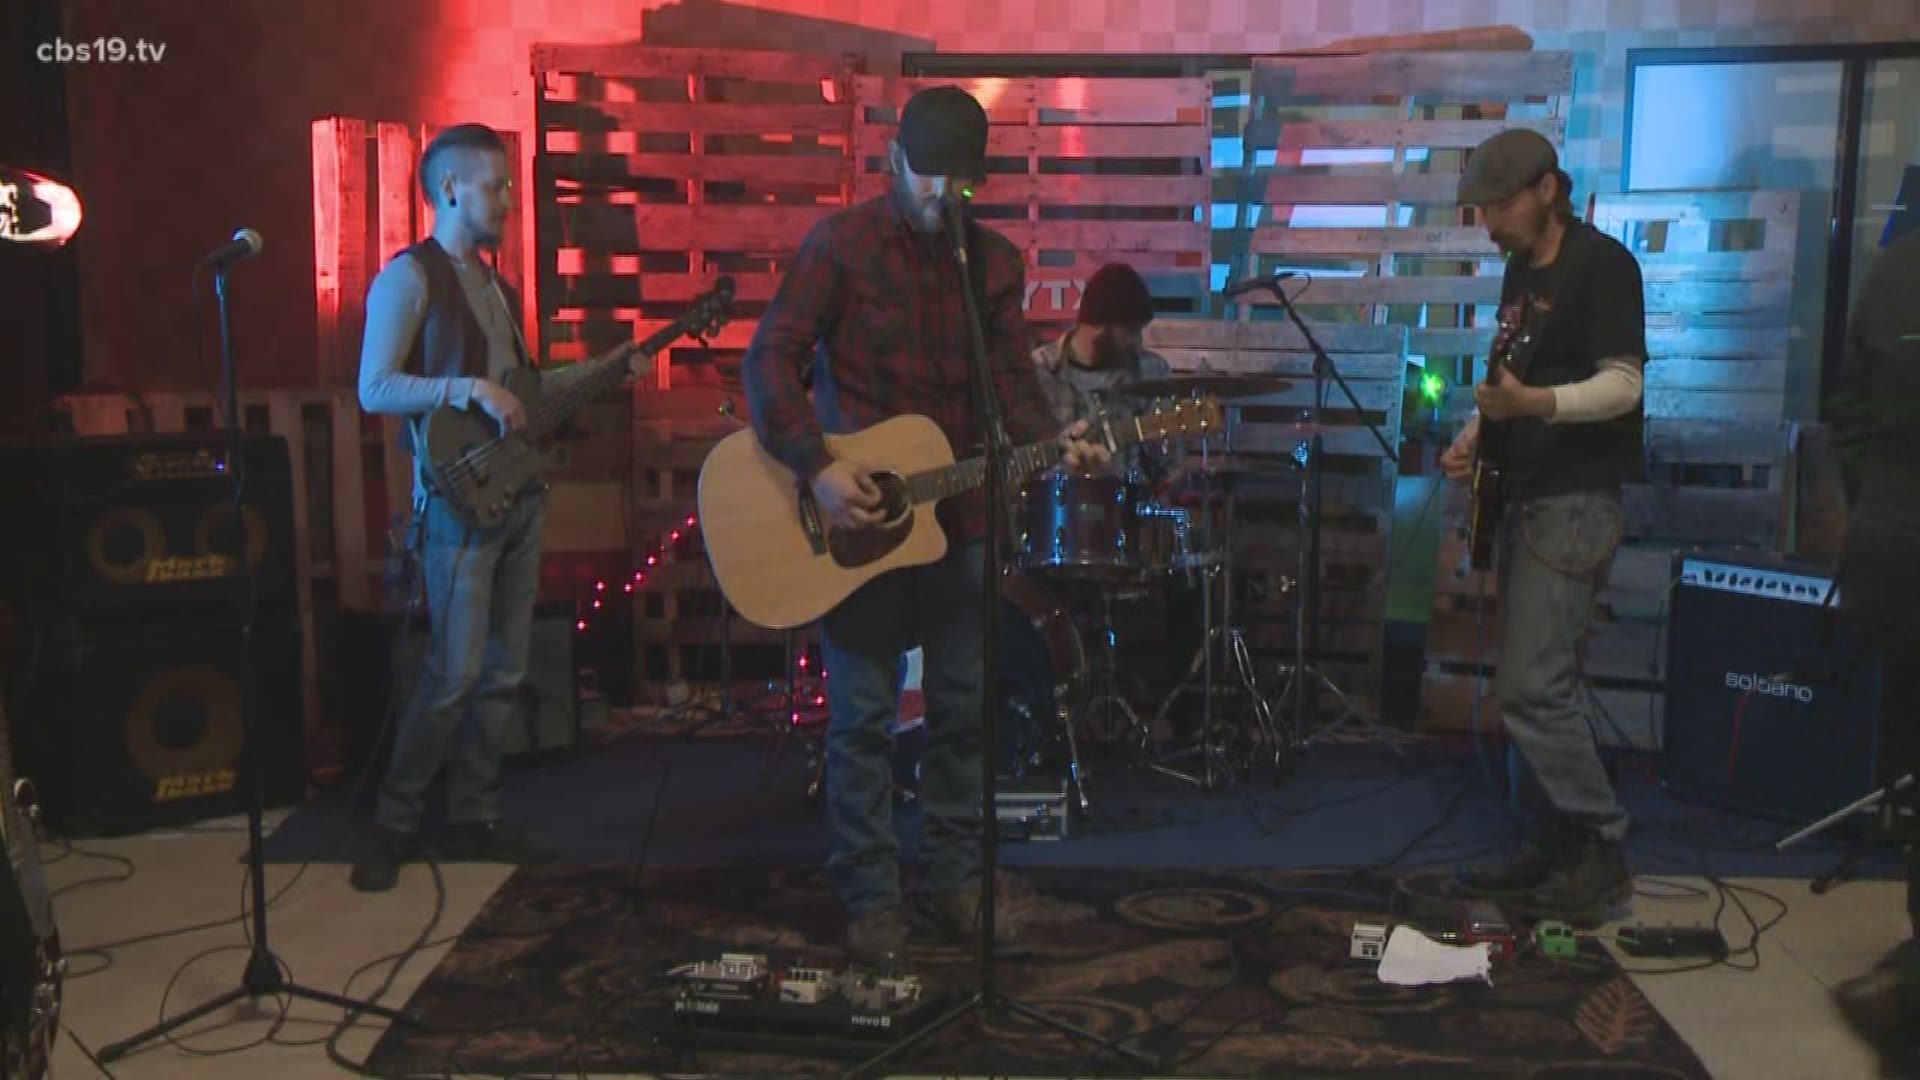 The Weathered Hearts take their talents to the CBS 19 stage!